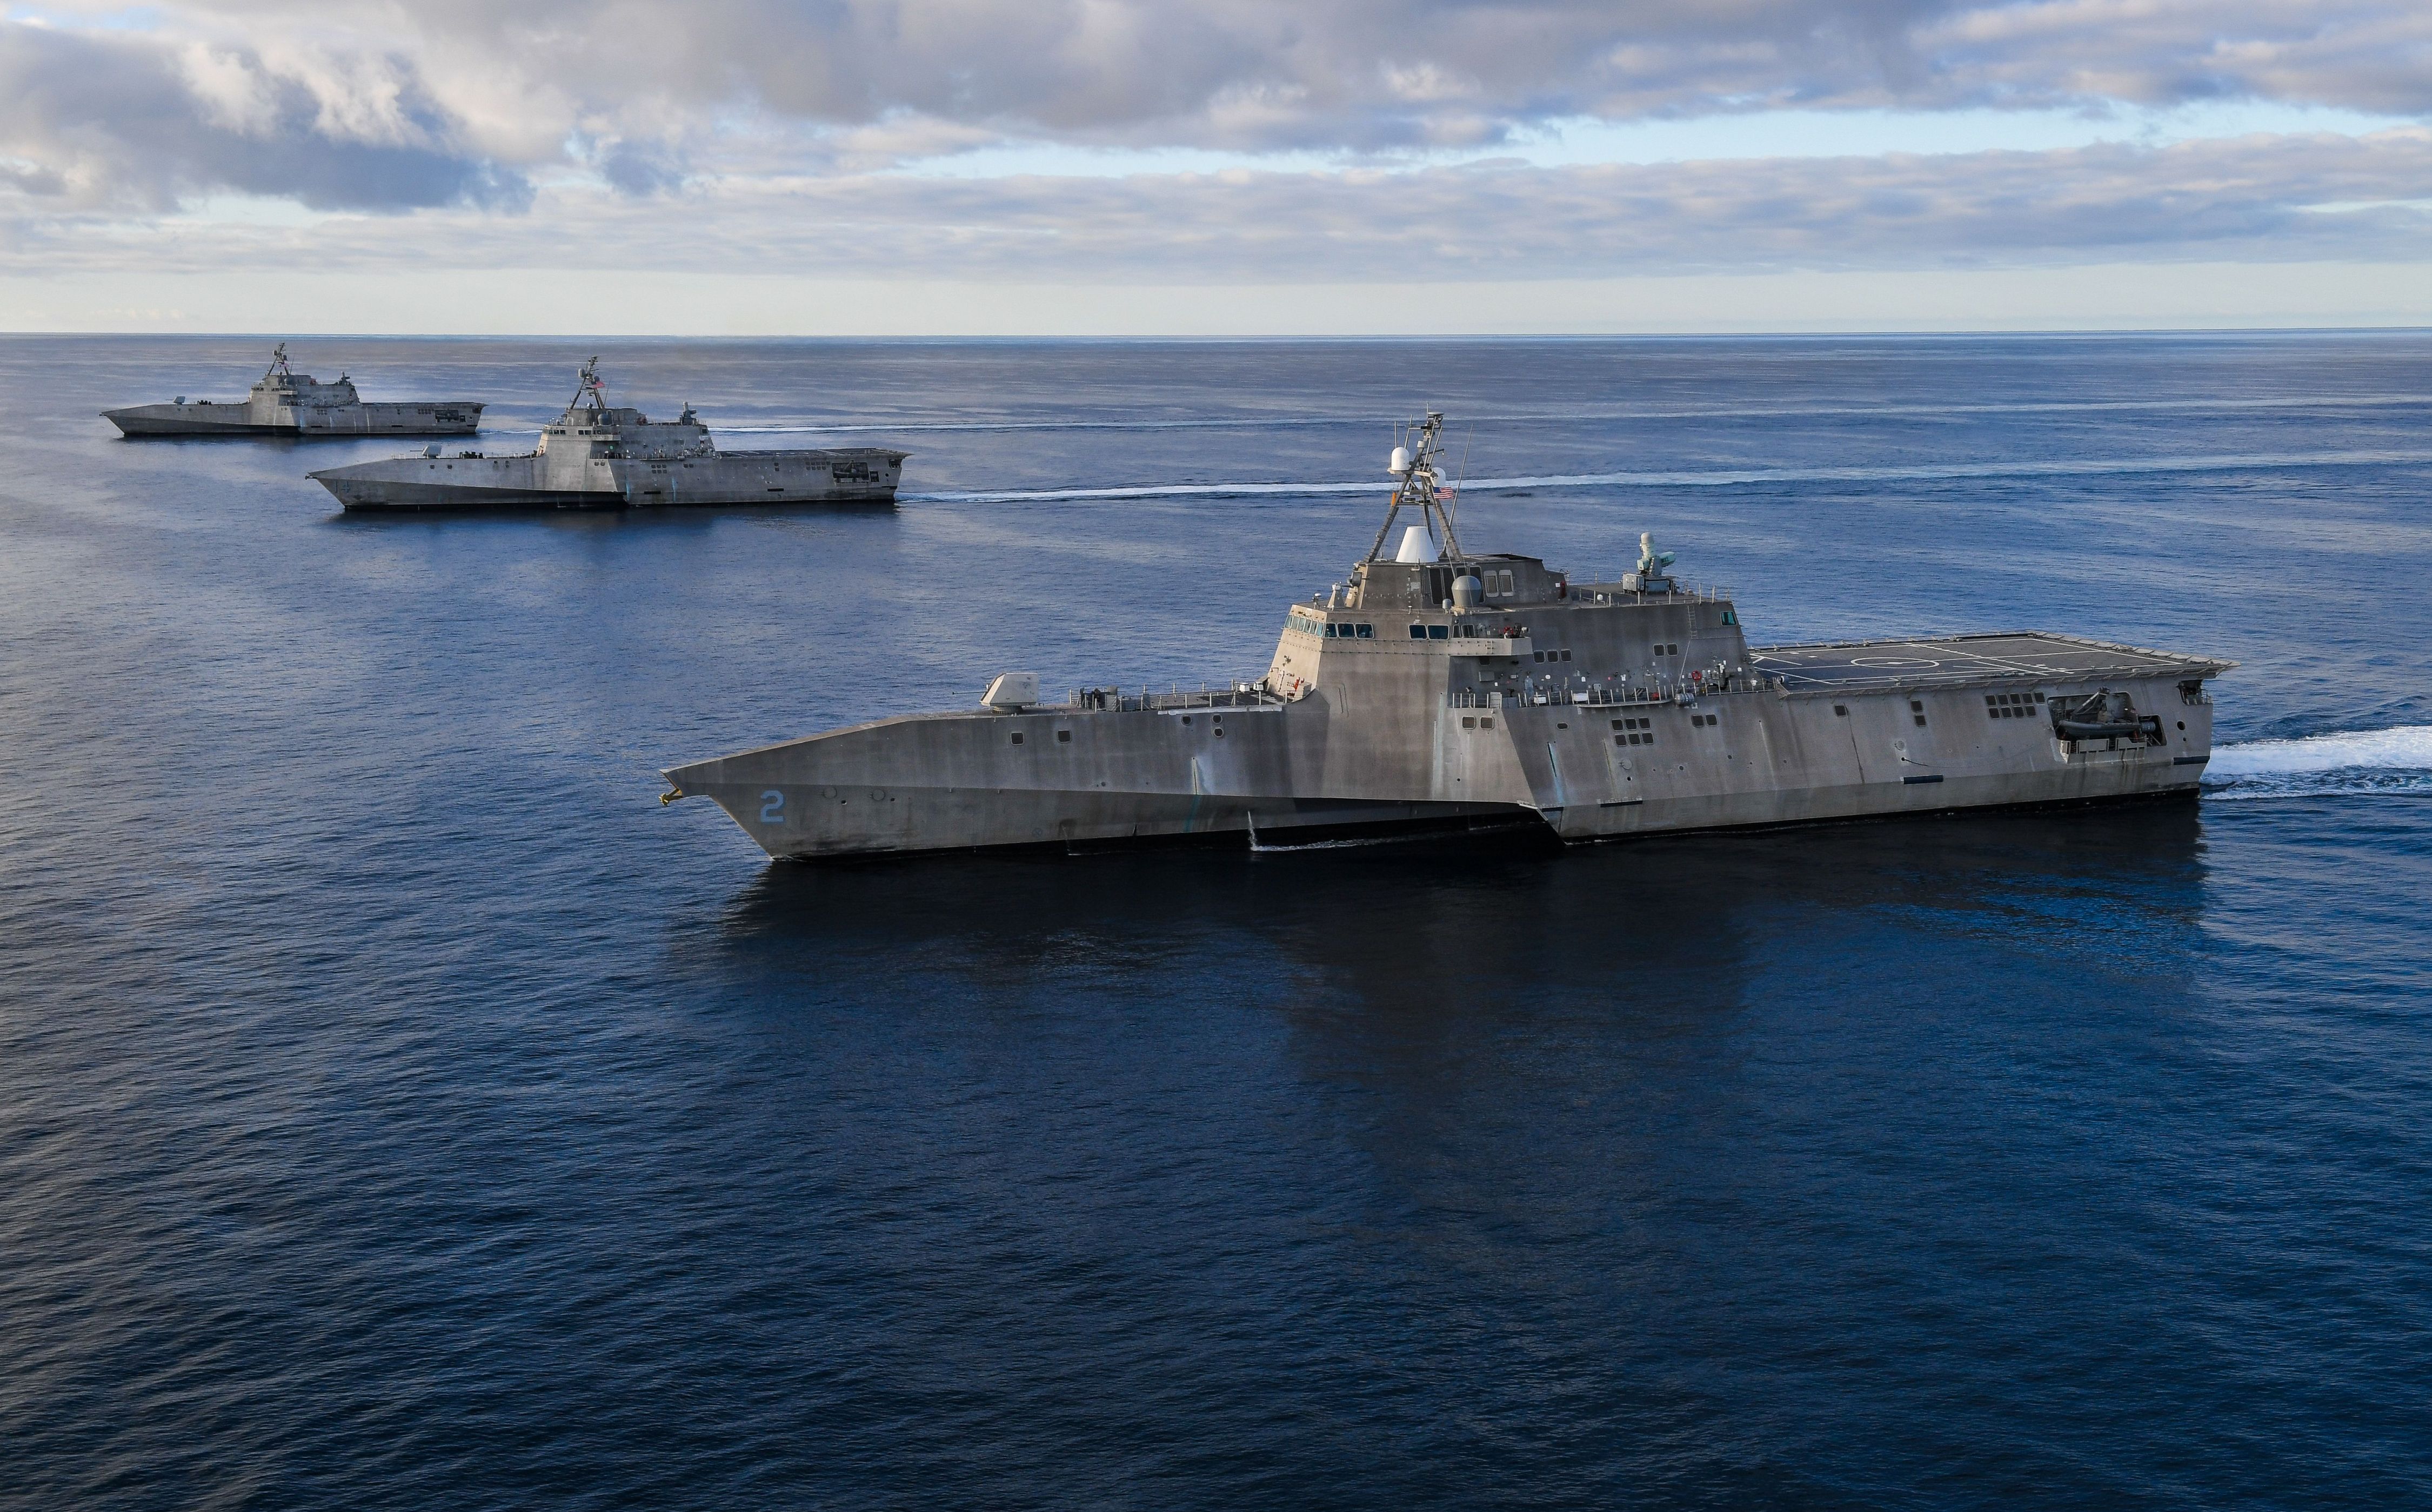 USS Independence (LCS 2), USS Manchester (LCS 14), and USS Tulsa (LCS 16)